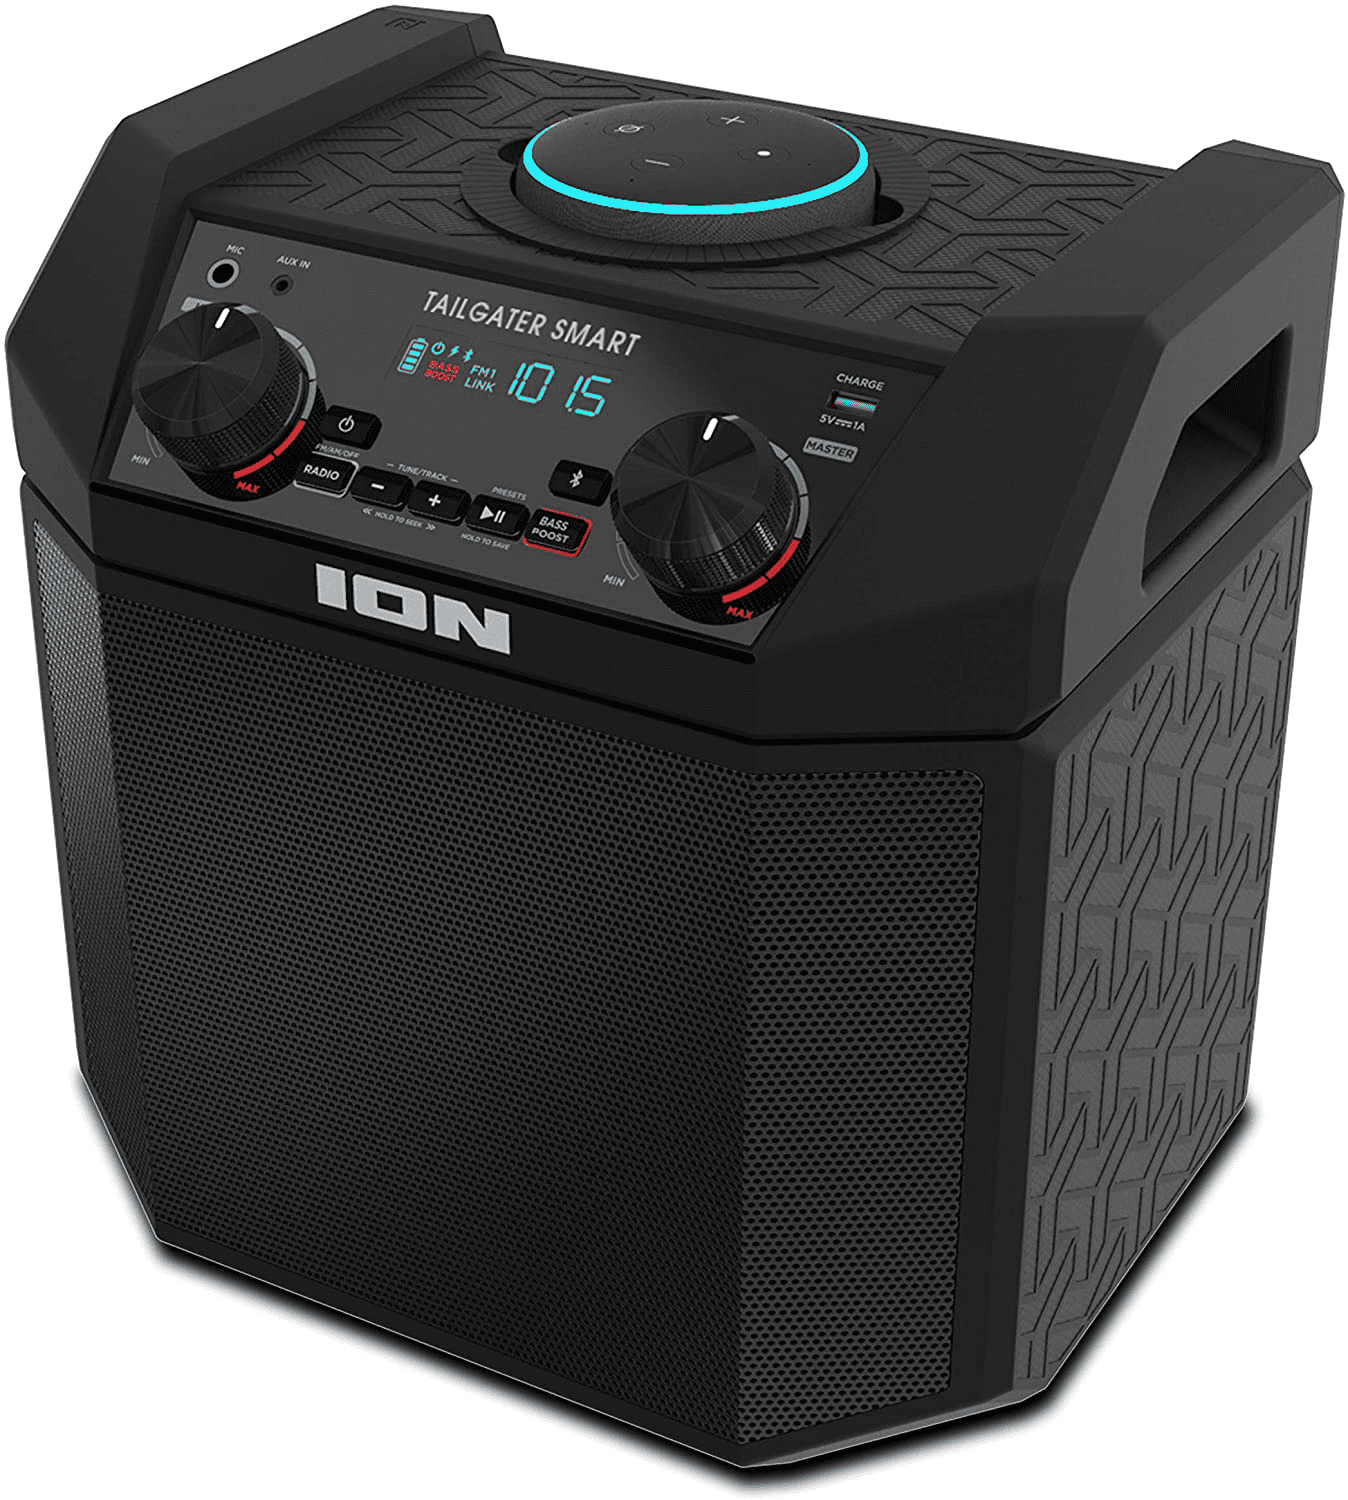 25W Portable Speaker Battery Powered with Bluetooth Microphone & Cable Audio Block Rocker Plus AM/FM Radio，with ECHO/Rich Bass/Treble， USB Charging For Smartphones & Tablets ACETGY